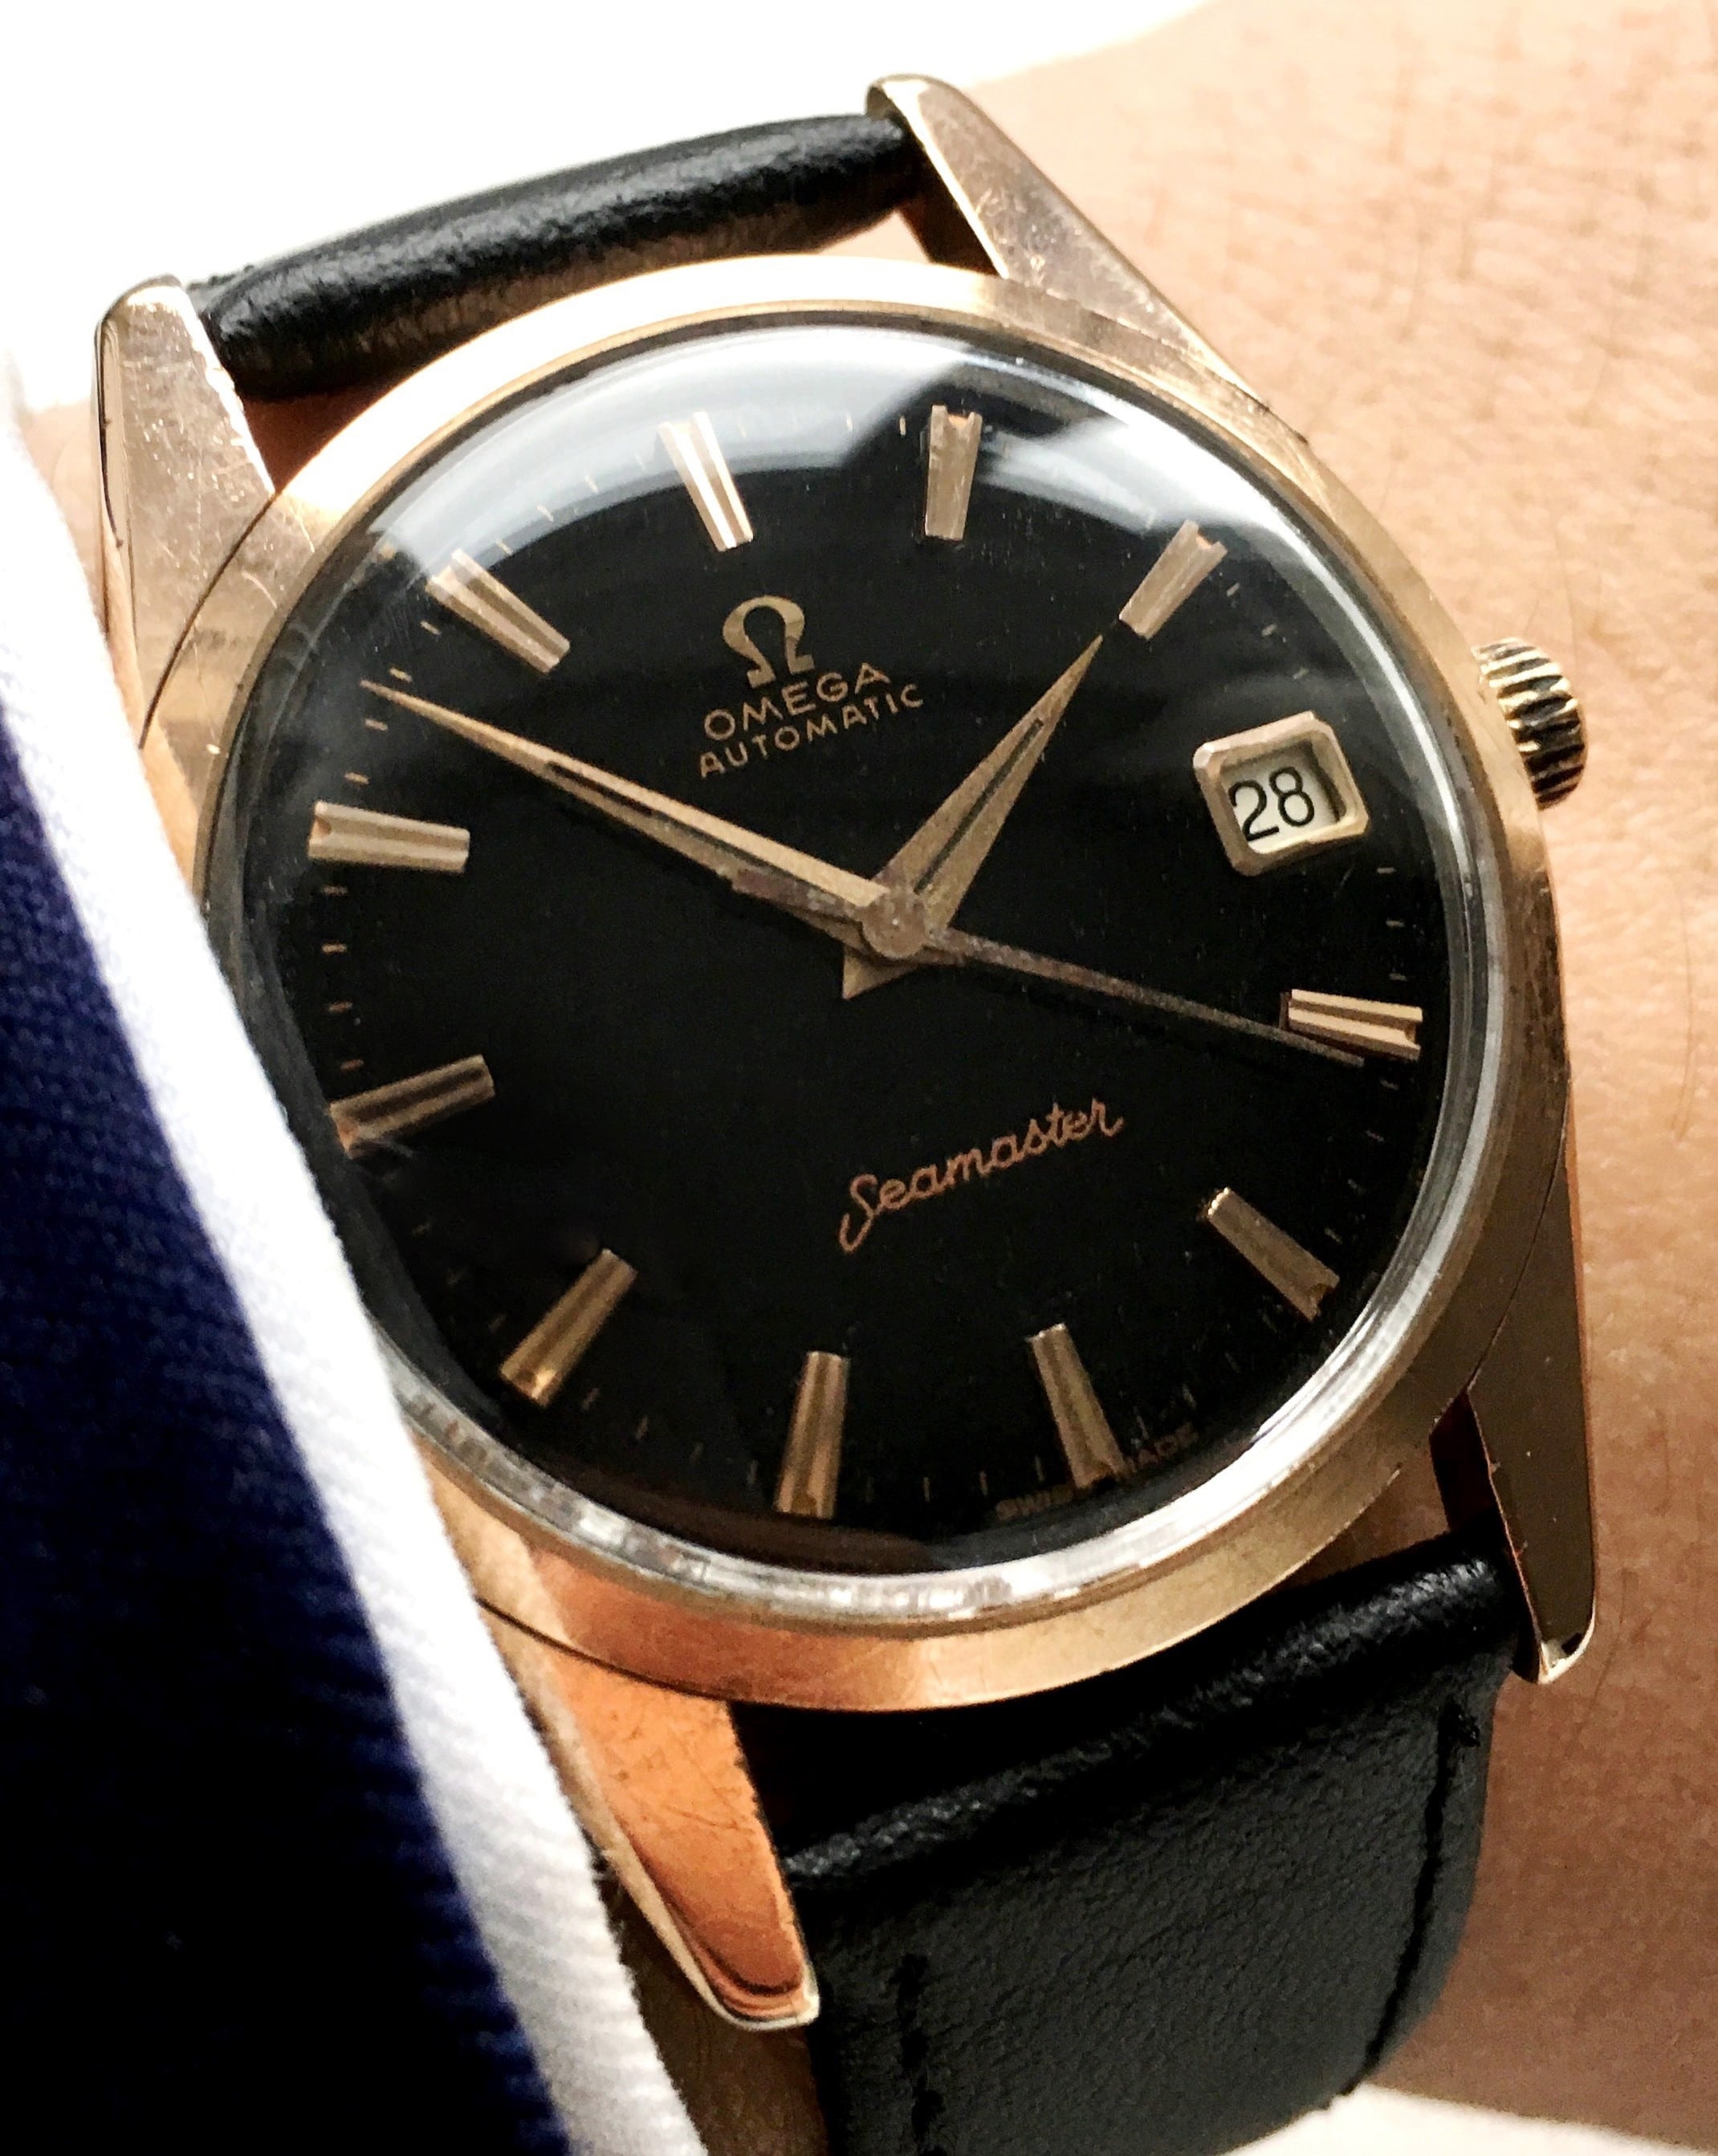 black and gold omega